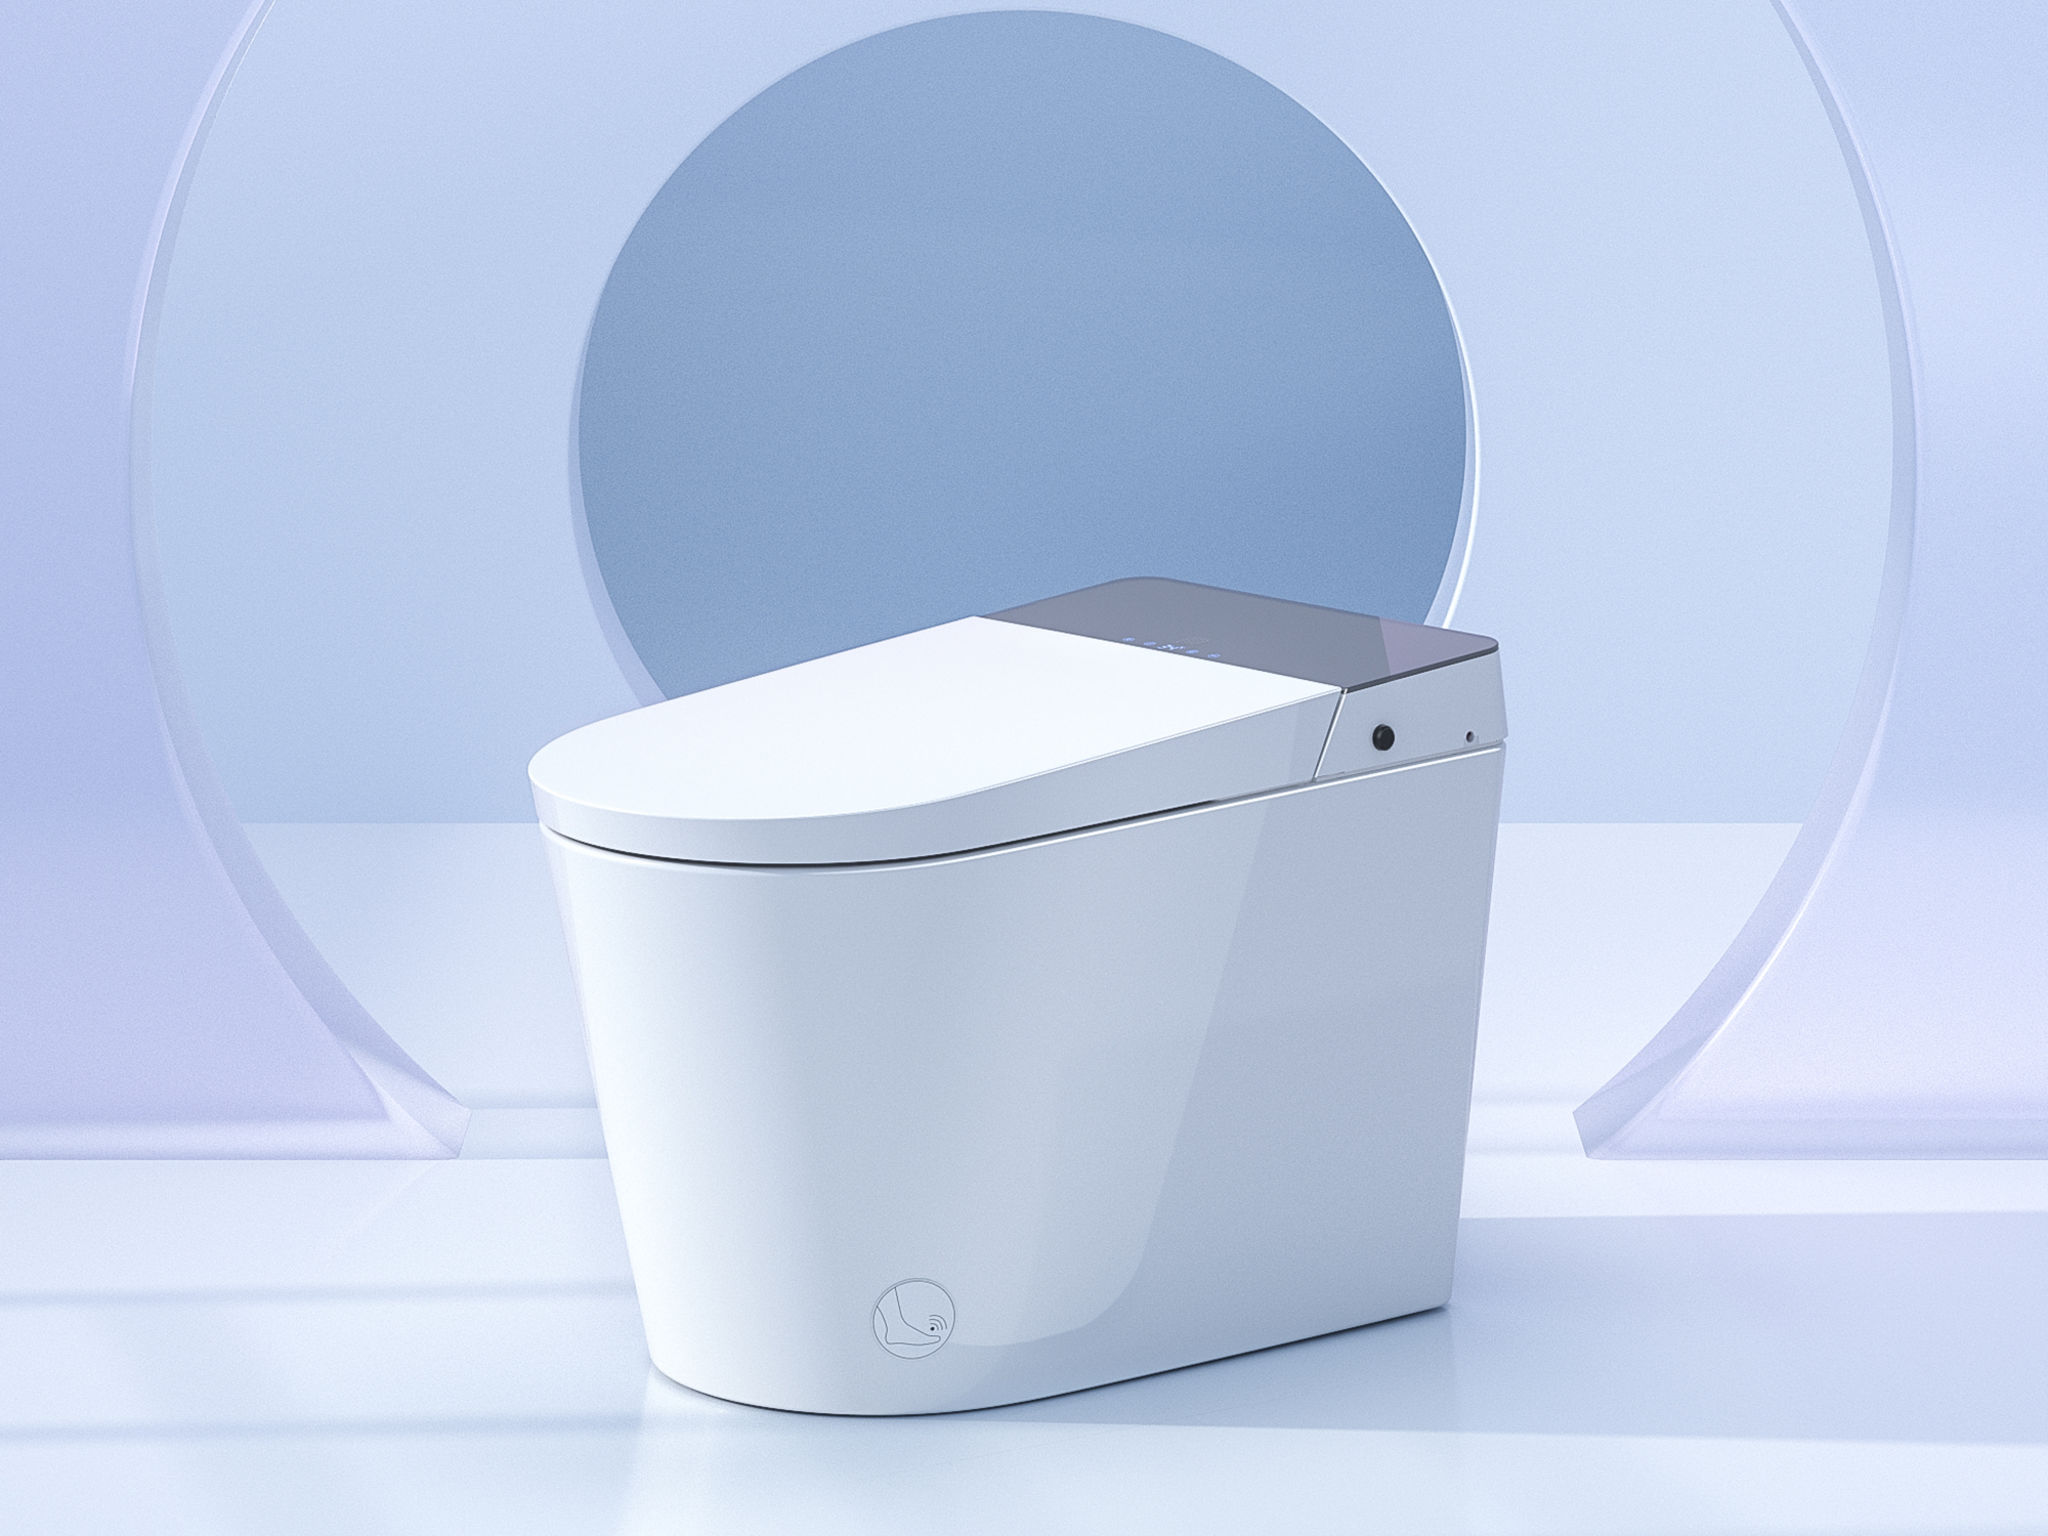 Full function voice control smart toilet